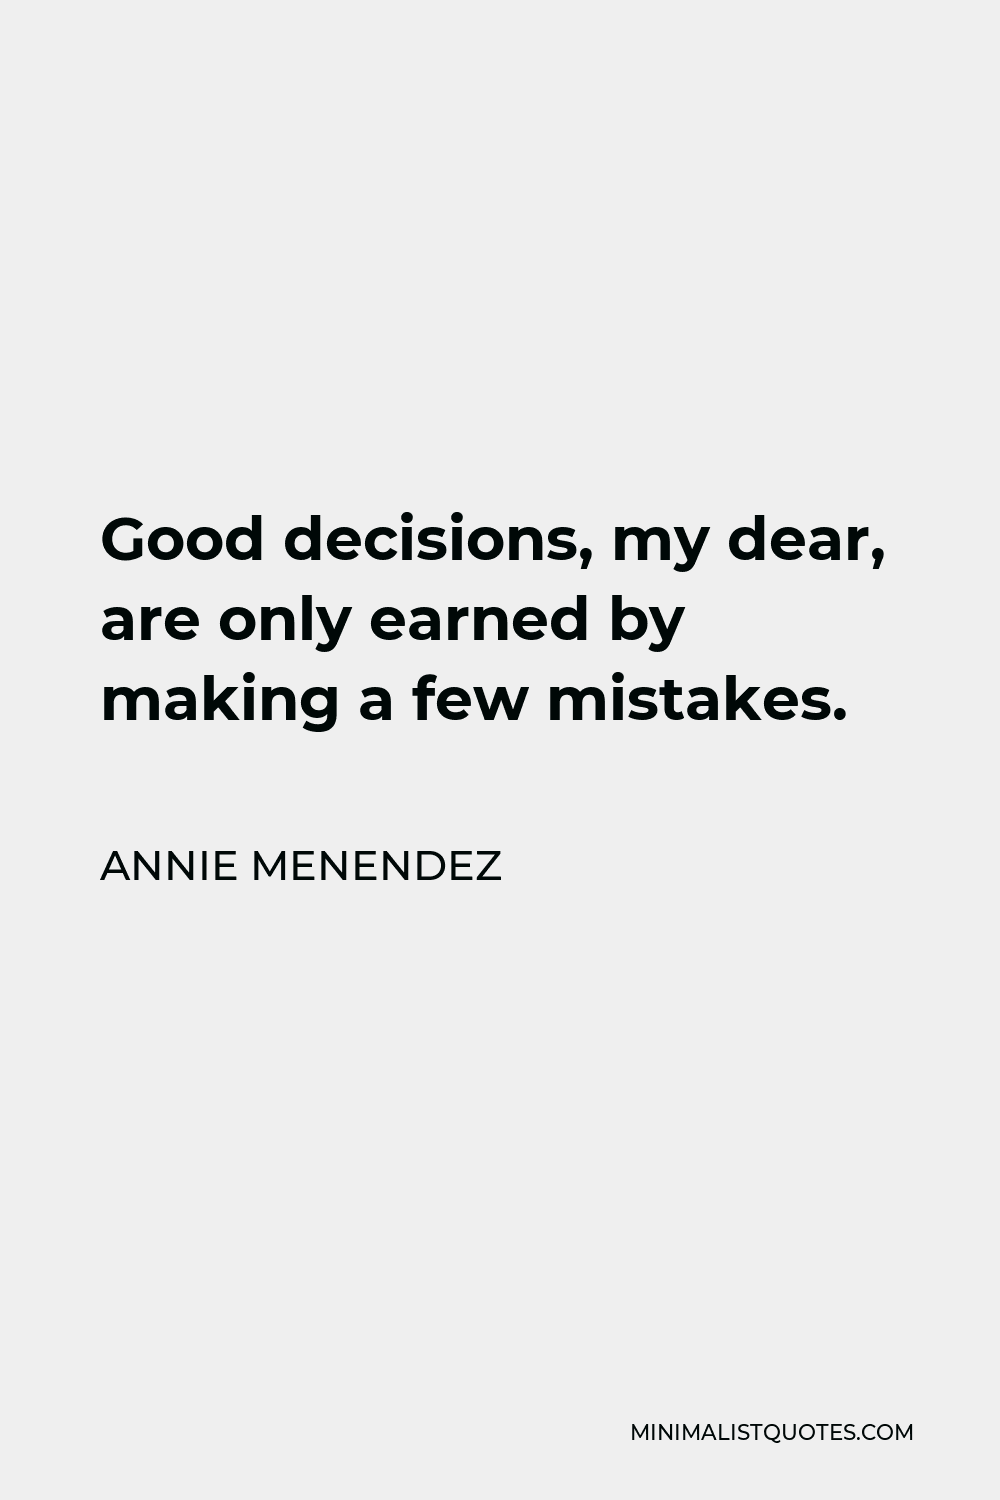 Annie Menendez Quote - Good decisions, my dear, are only earned by making a few mistakes.